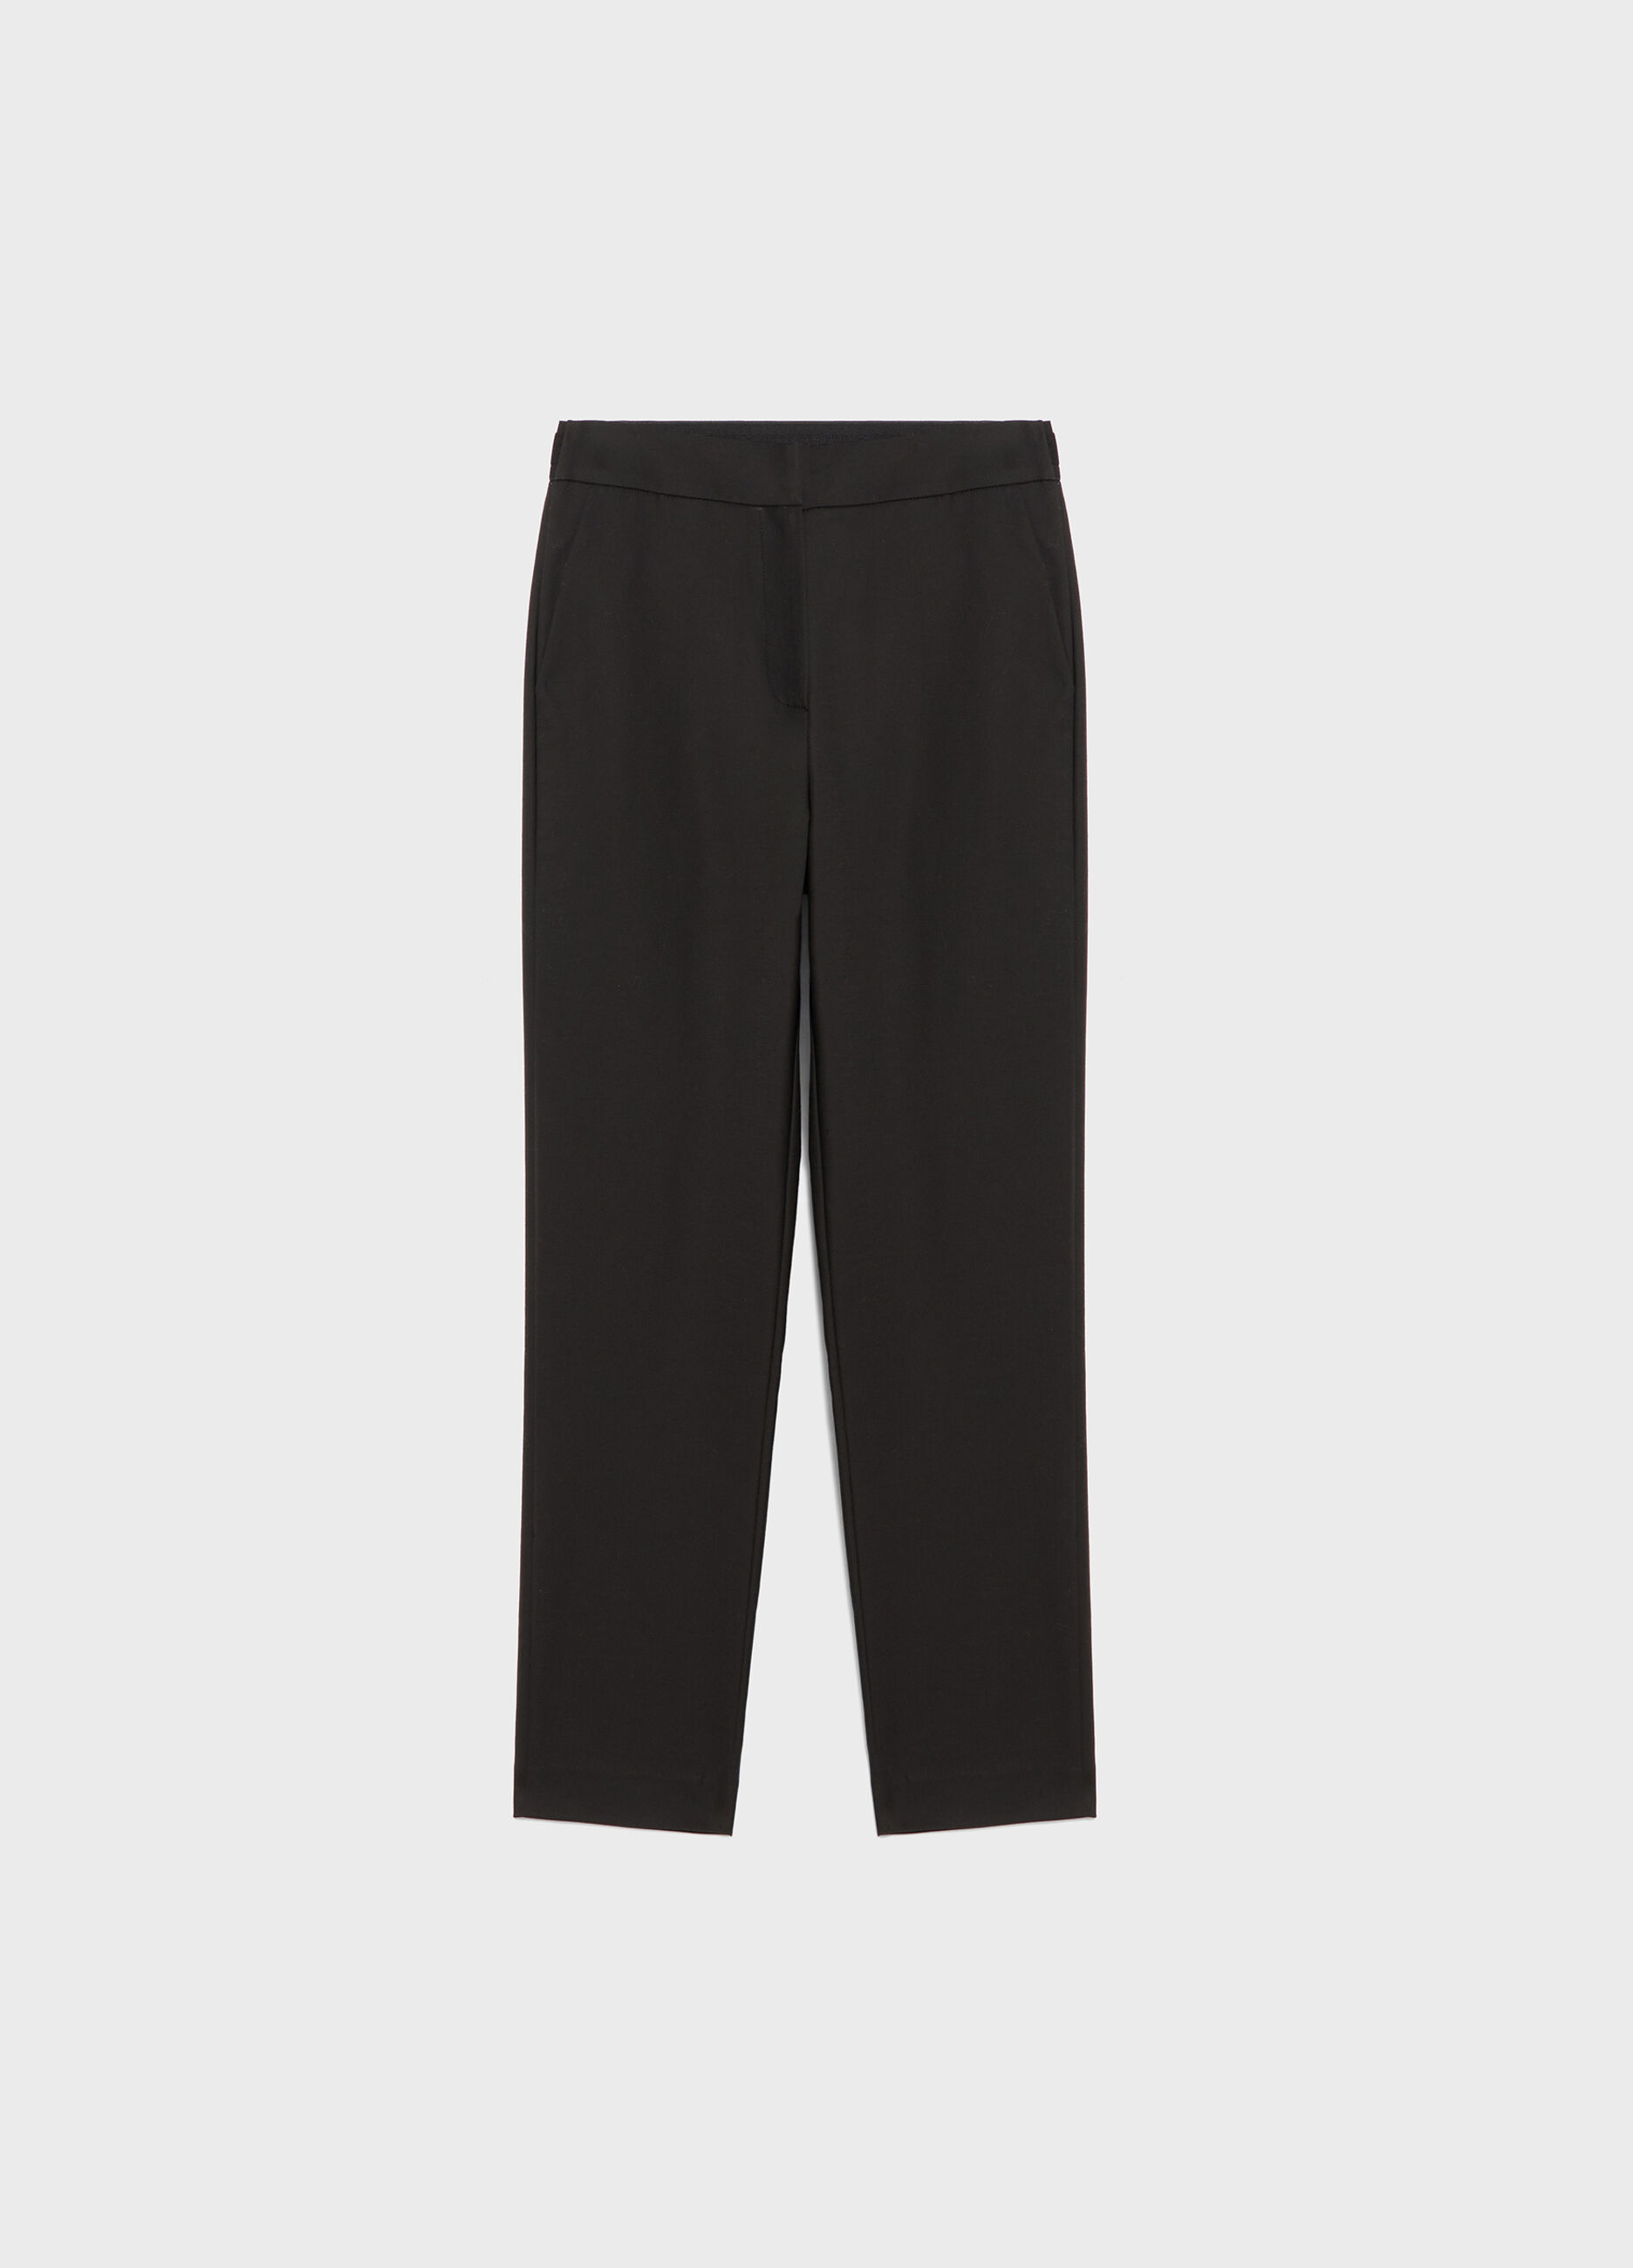 Black cigarette trousers with elastic_4